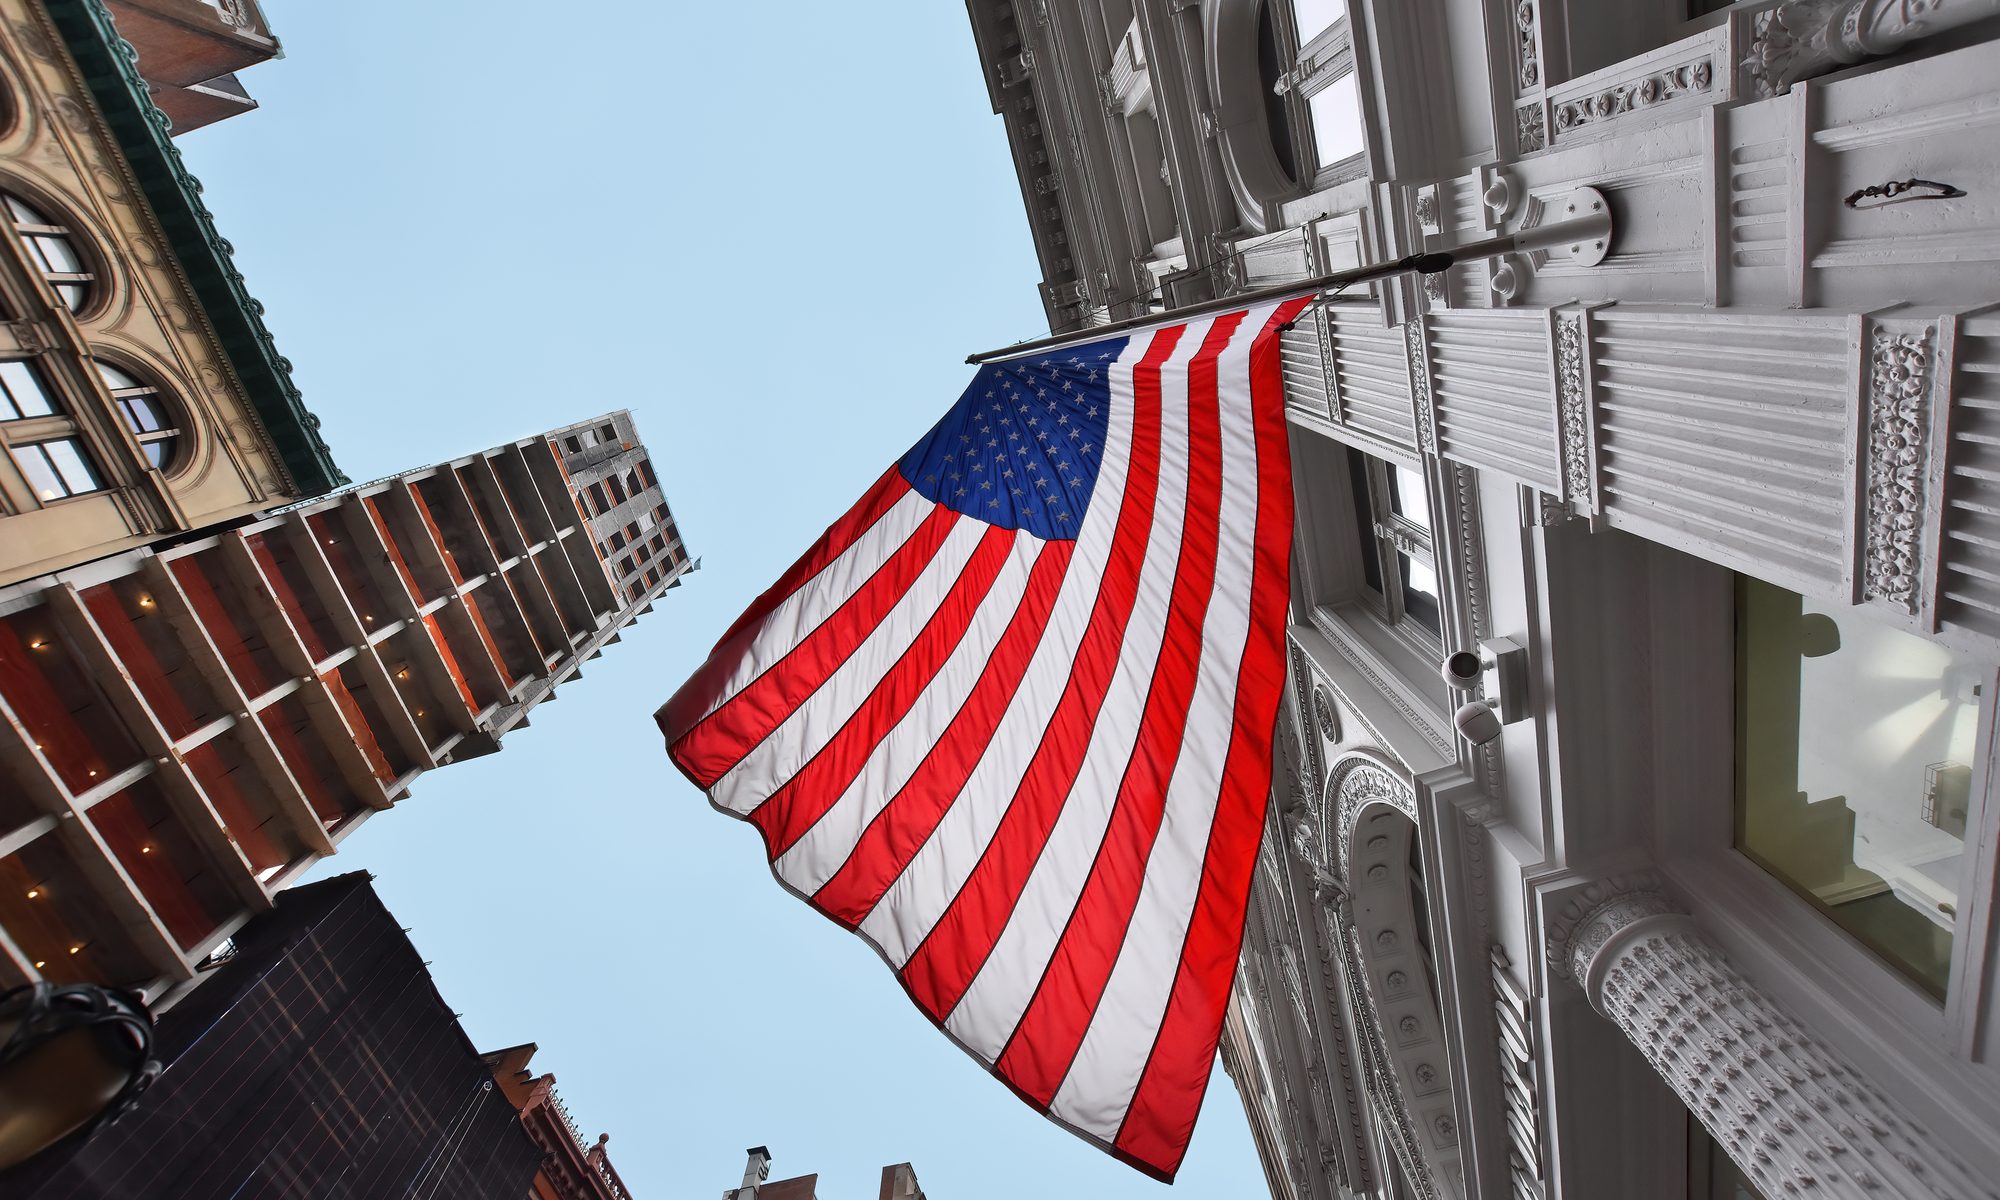 photograph of American flag hanging from tall buildings